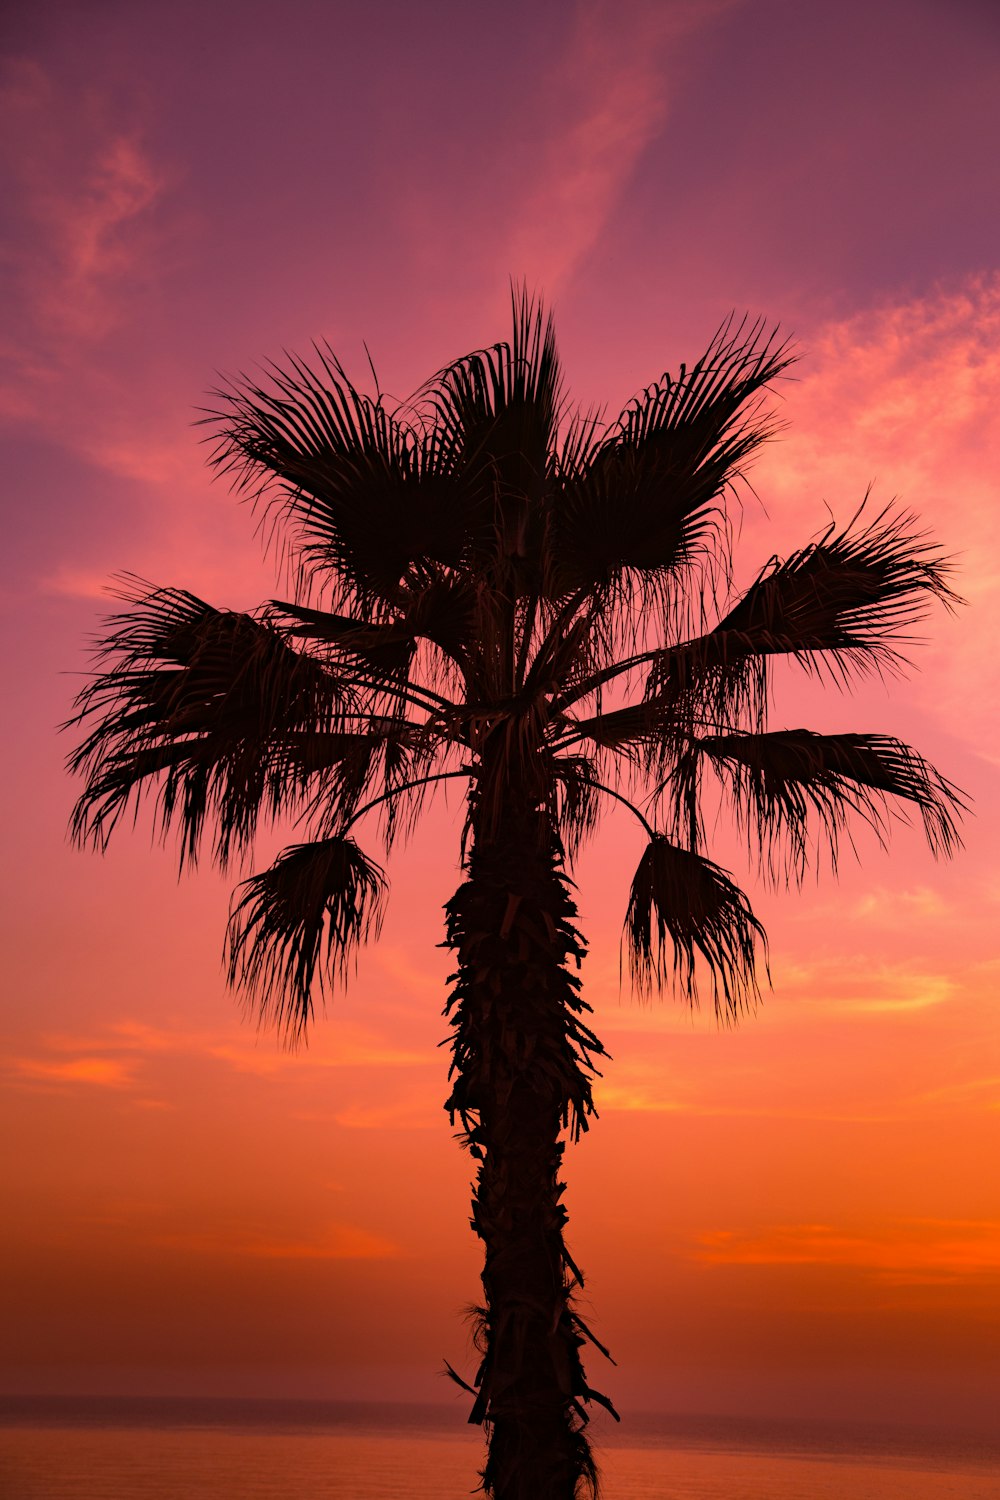 sago palm tree under pink sky at sunsetr